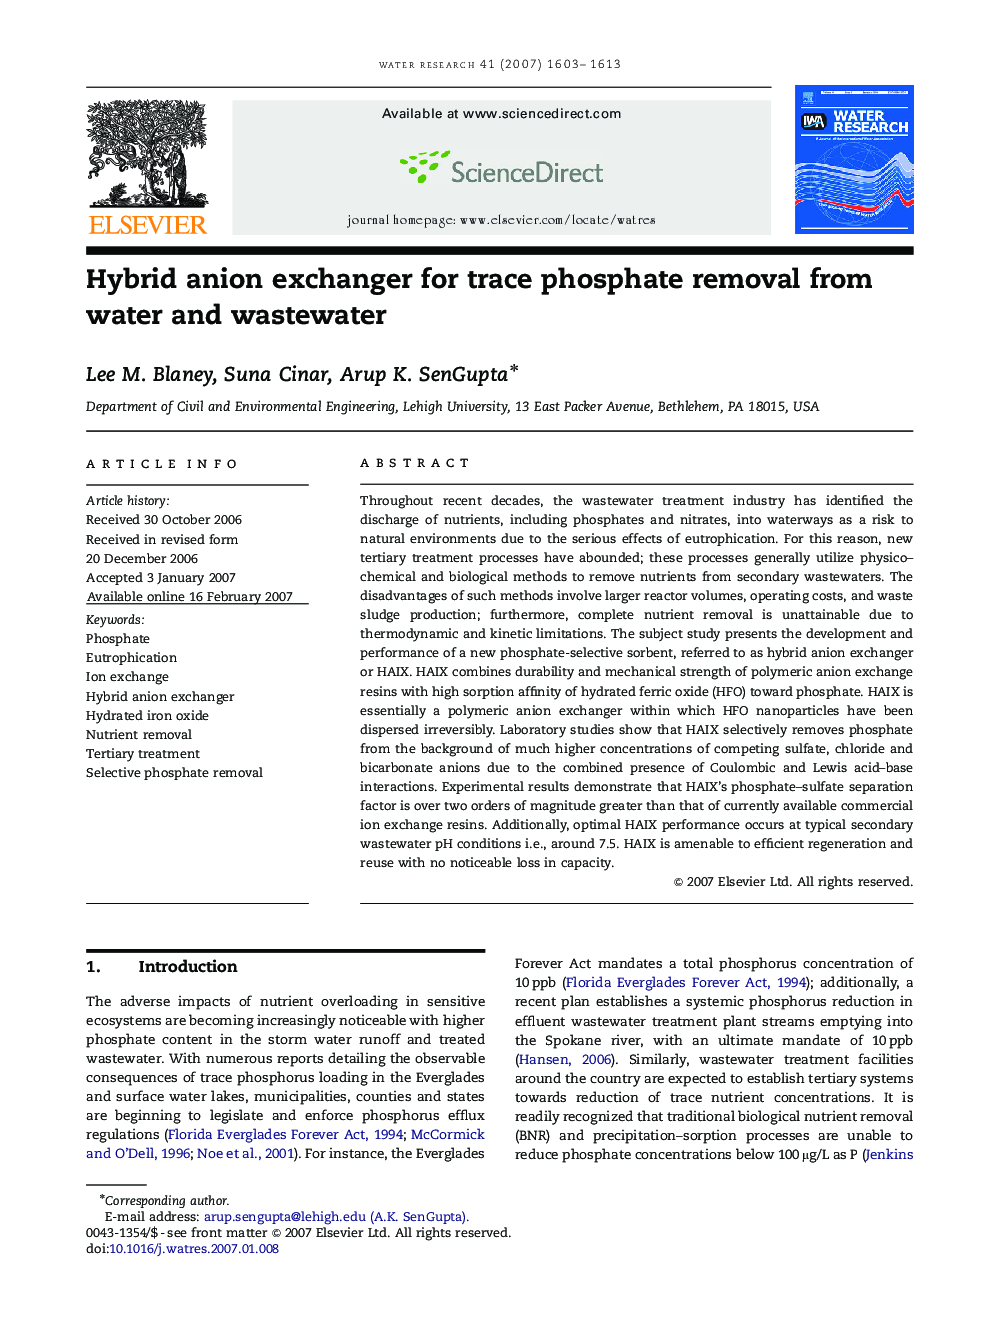 Hybrid anion exchanger for trace phosphate removal from water and wastewater